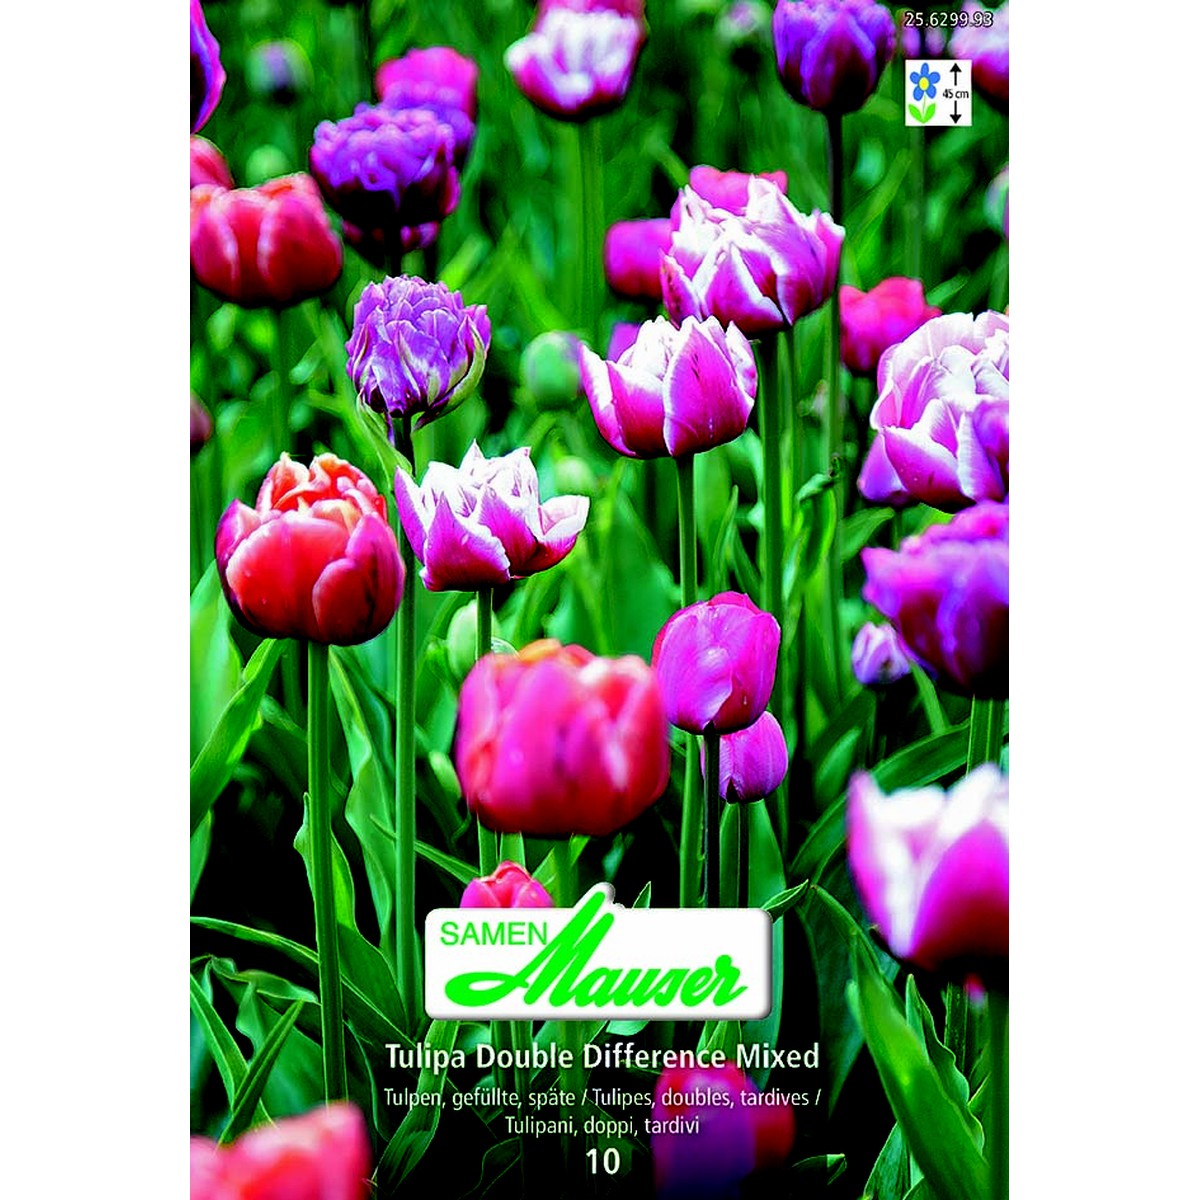   Tulipe TTD Double Difference Mixed 10  12/